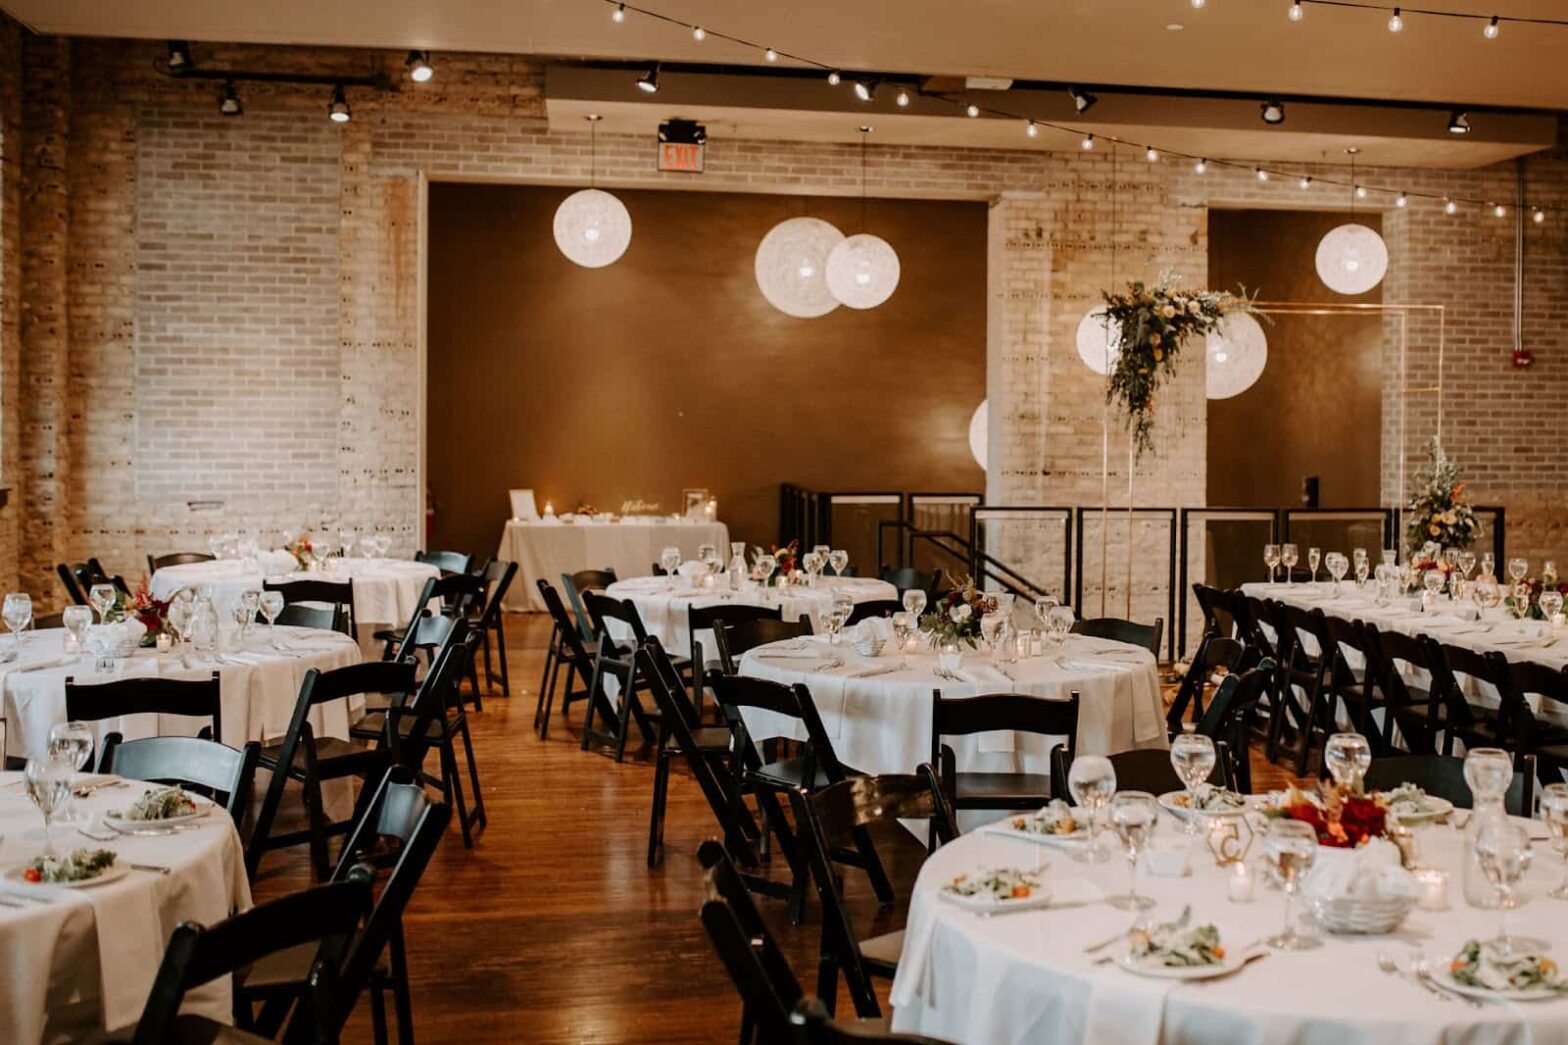 Setting up a wedding venue with tables and chairs.